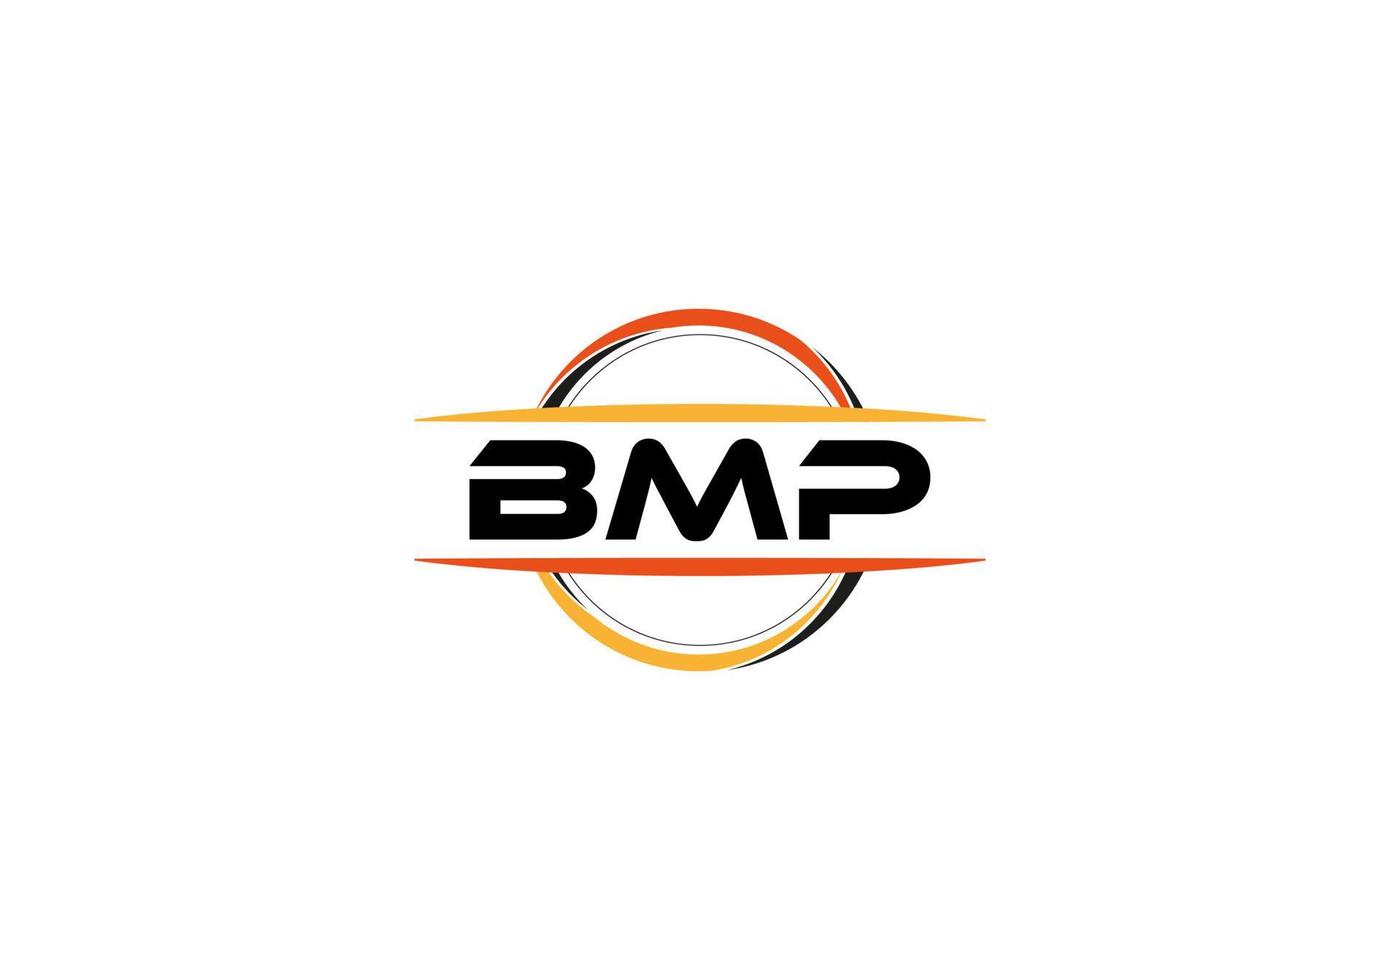 BMP letter royalty ellipse shape logo. BMP brush art logo. BMP logo for a company, business, and commercial use. vector